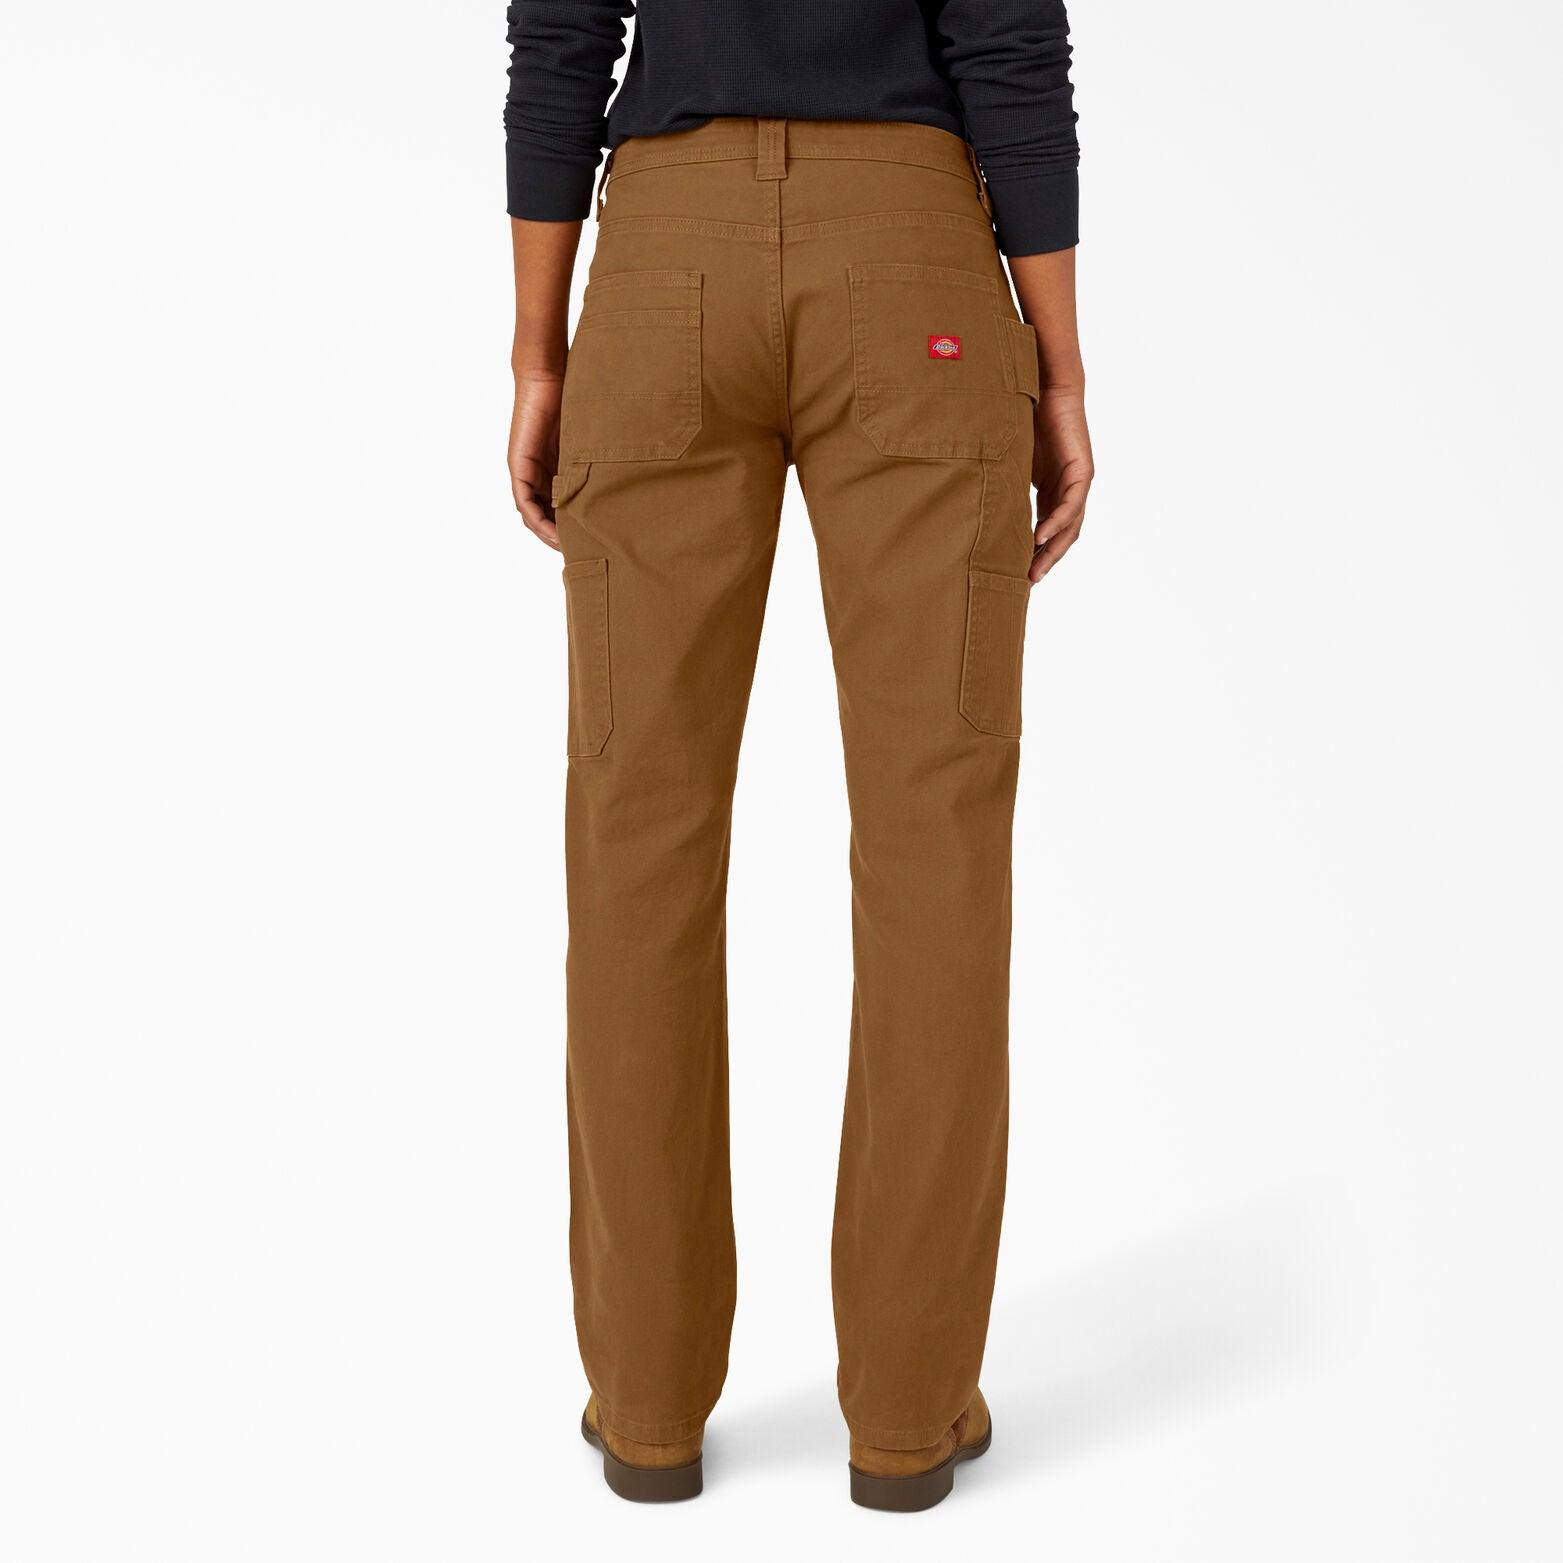 Women's Carpenter Pant - Brown Duck - Purpose-Built / Home of the Trades